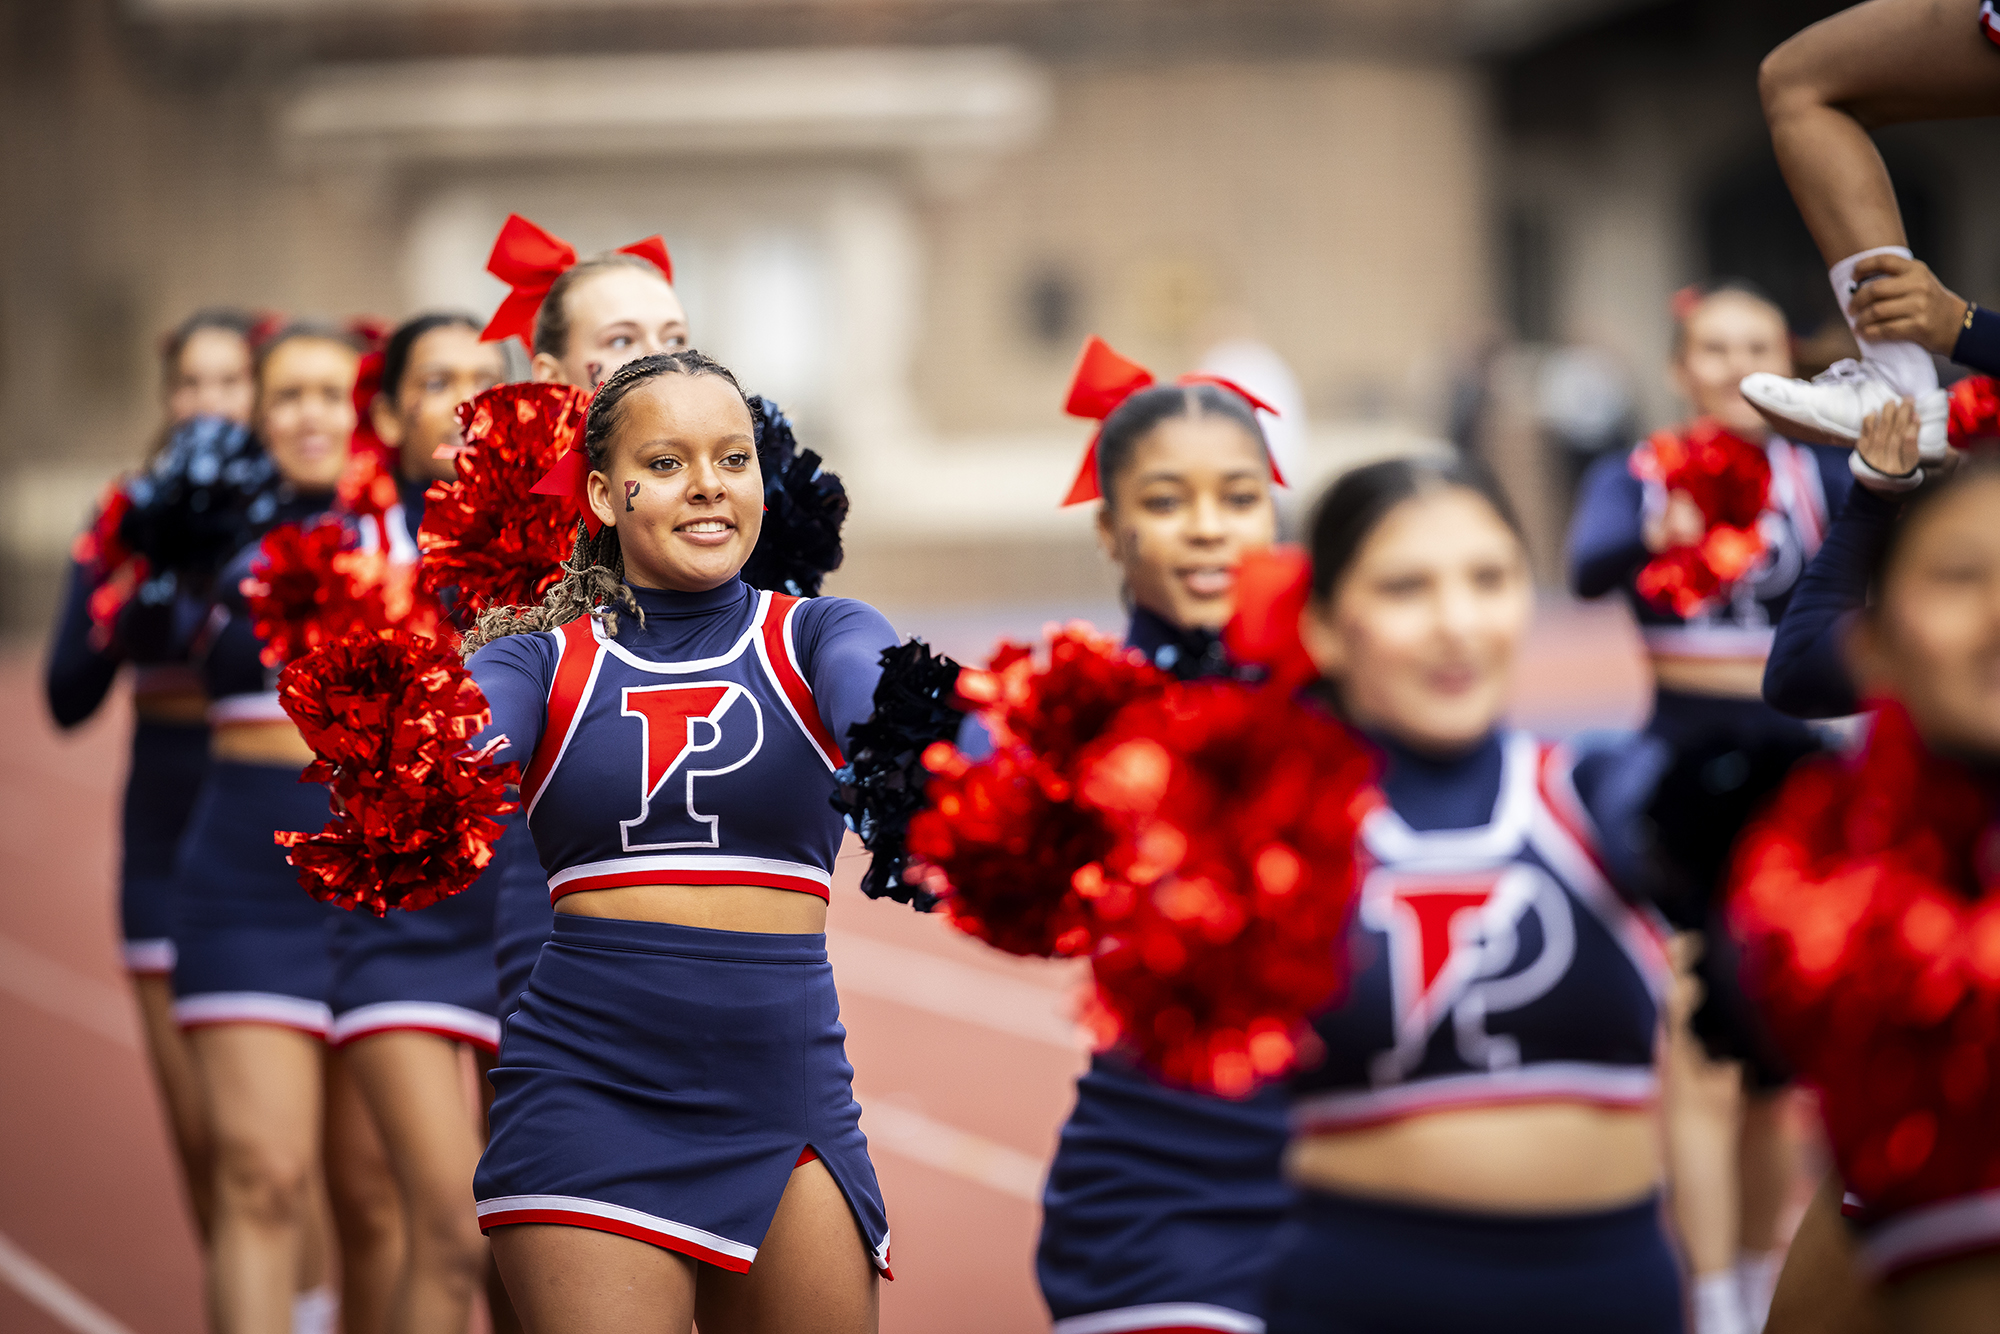 penn cheerleaders during the homecoming game